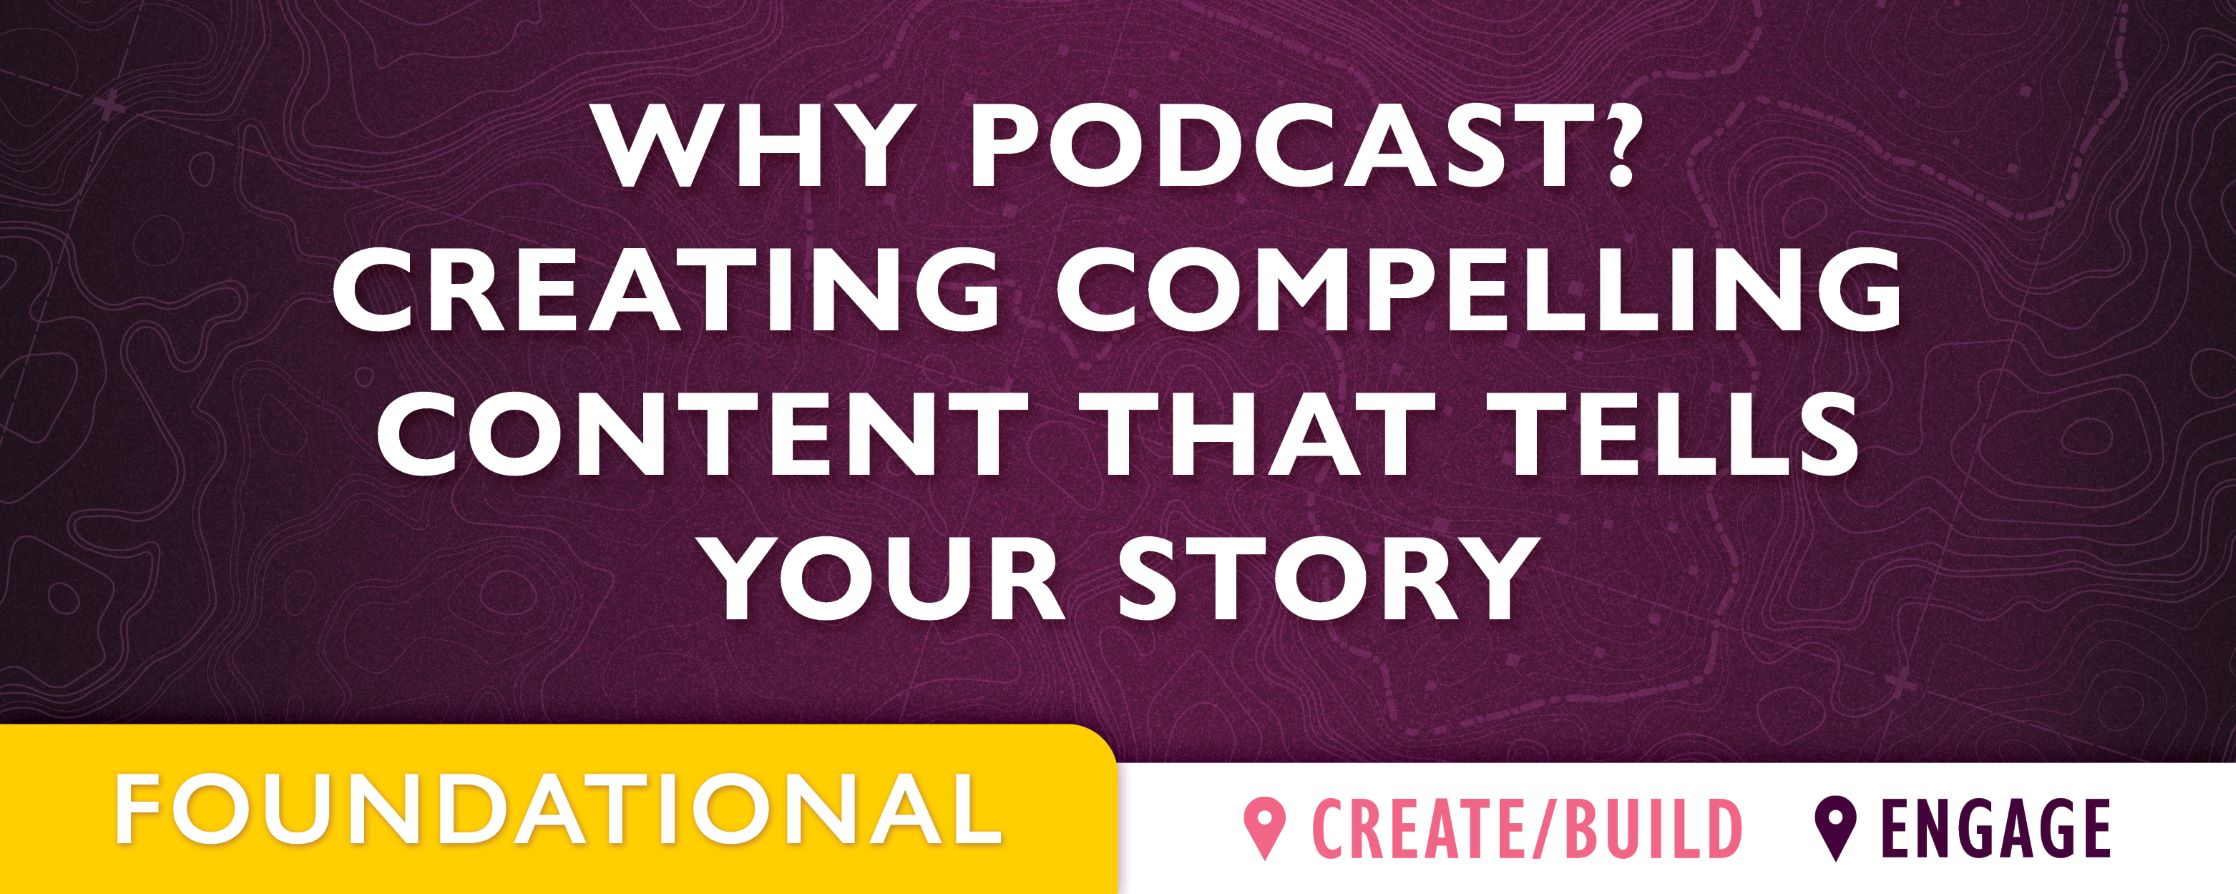 purple background with text: Why Podcast? Creating Compelling Content That Tells Your Story